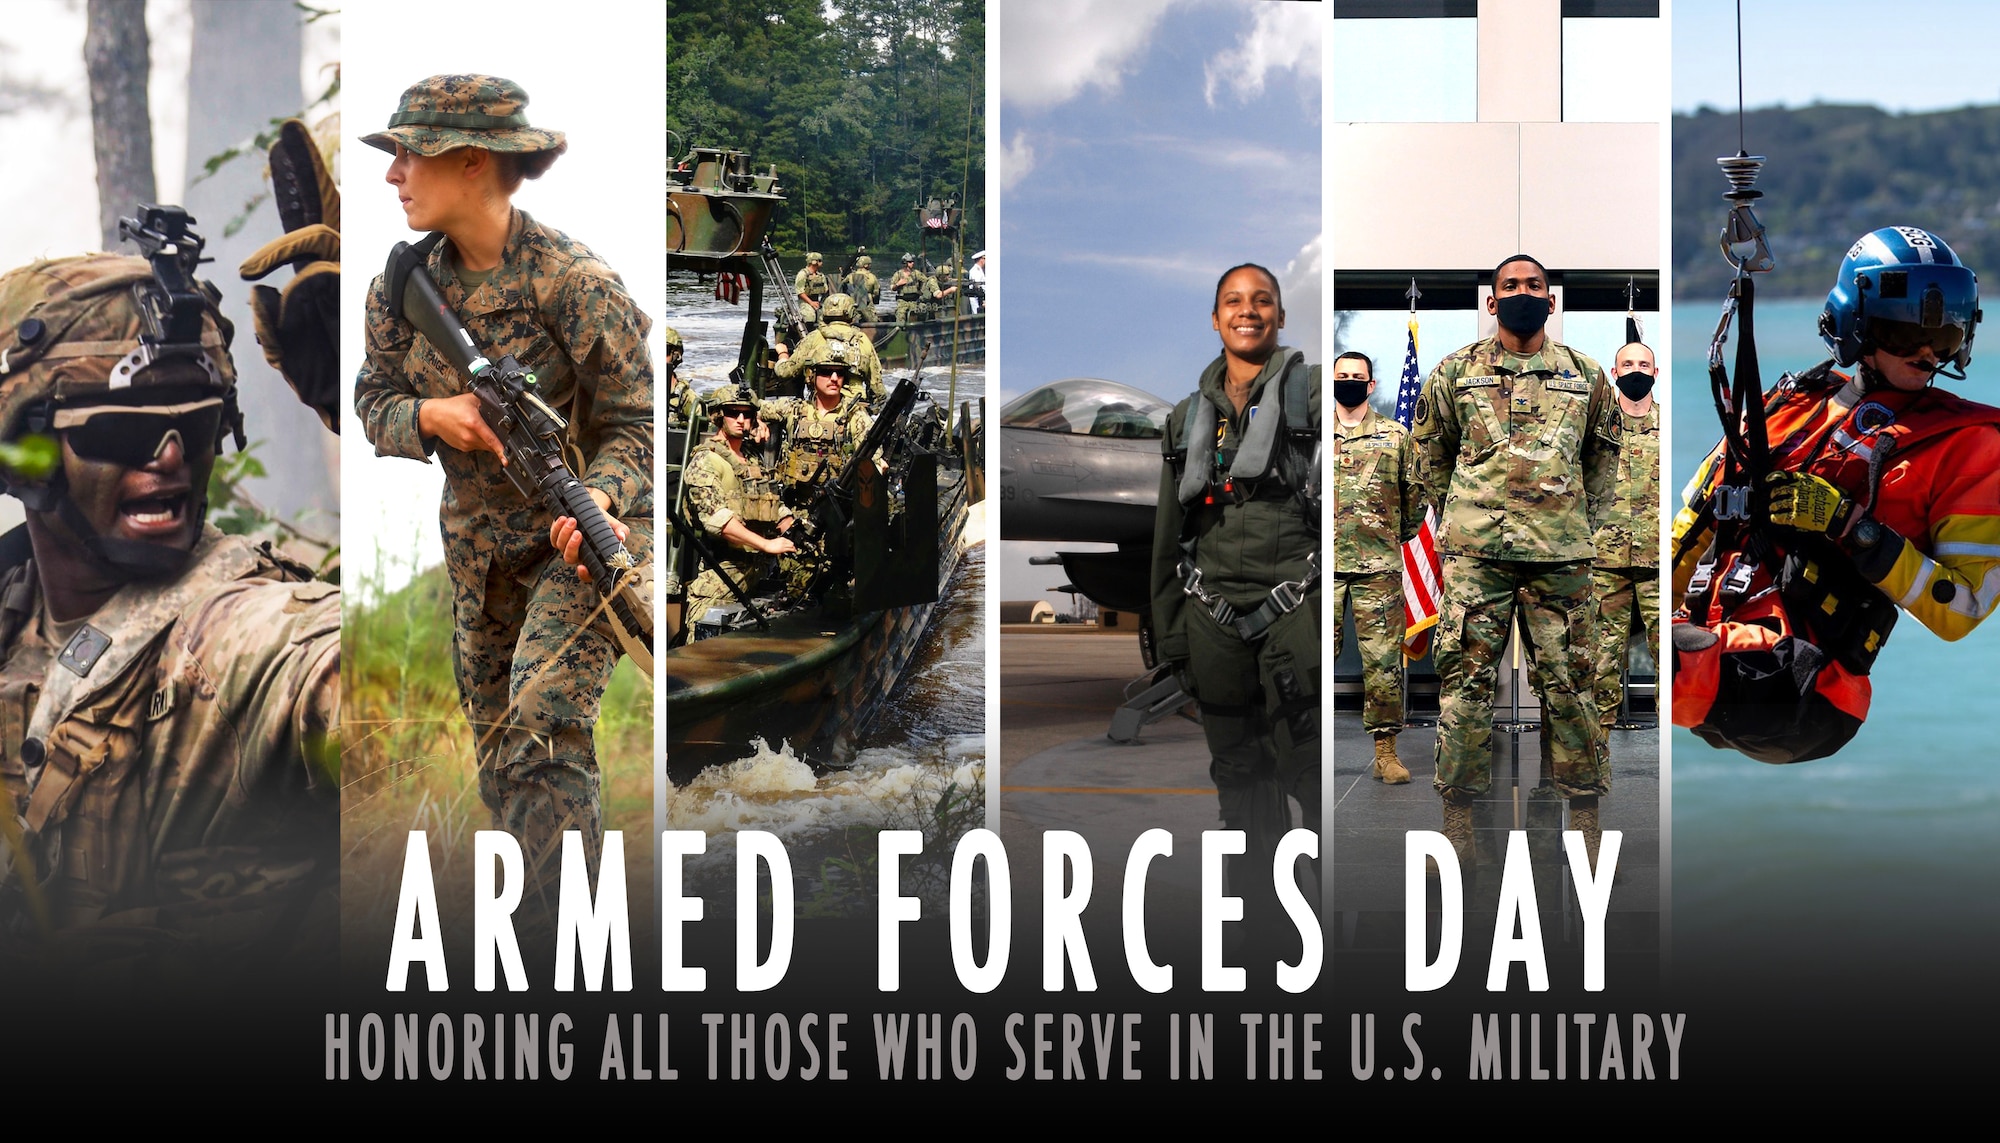 The 15th Wing pays homage to service members in all five branches of the U.S military on National Armed Forces Day at Joint Base Pearl Harbor-Hickam, Hawaii, May 15, 2021. Armed Forces Day was established in 1949 and falls on the third Saturday in May. (U.S. Air Force graphic by Airman 1st Class Makensie Cooper)